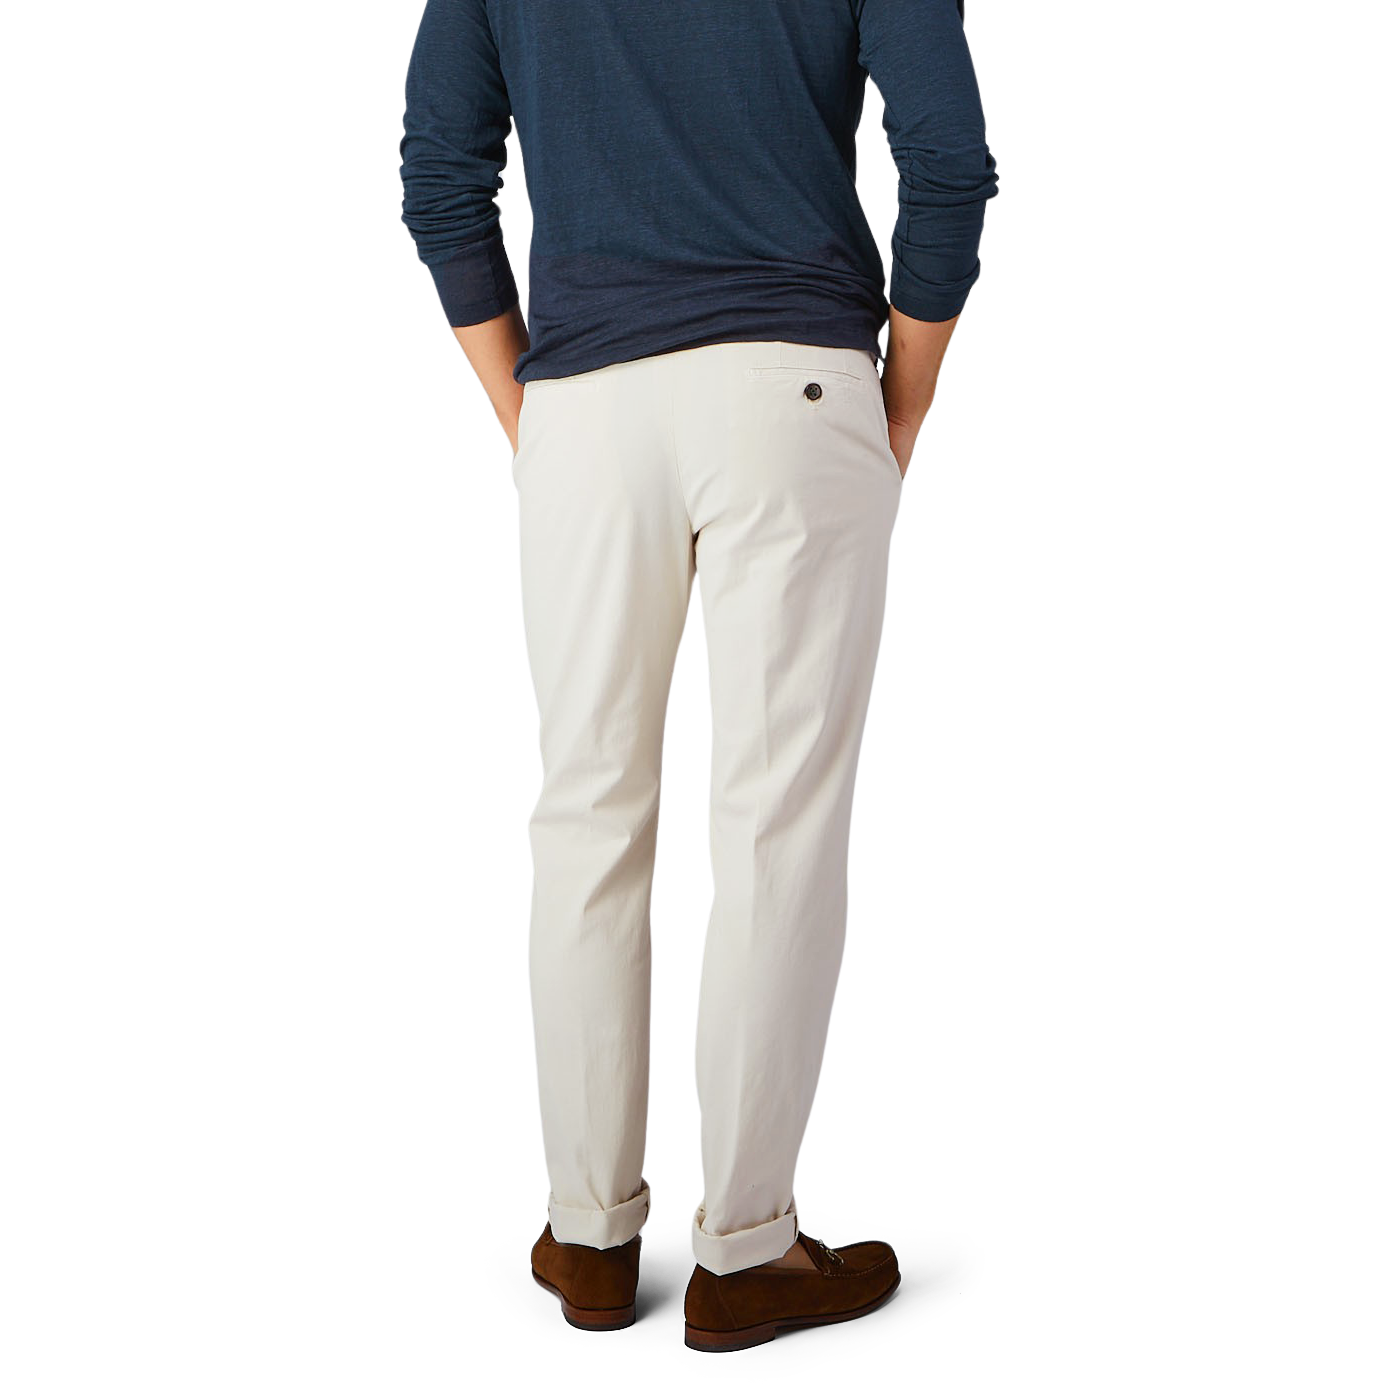 The man is wearing Light Beige Cotton Stretch Chinos by Berwich and a blue shirt.